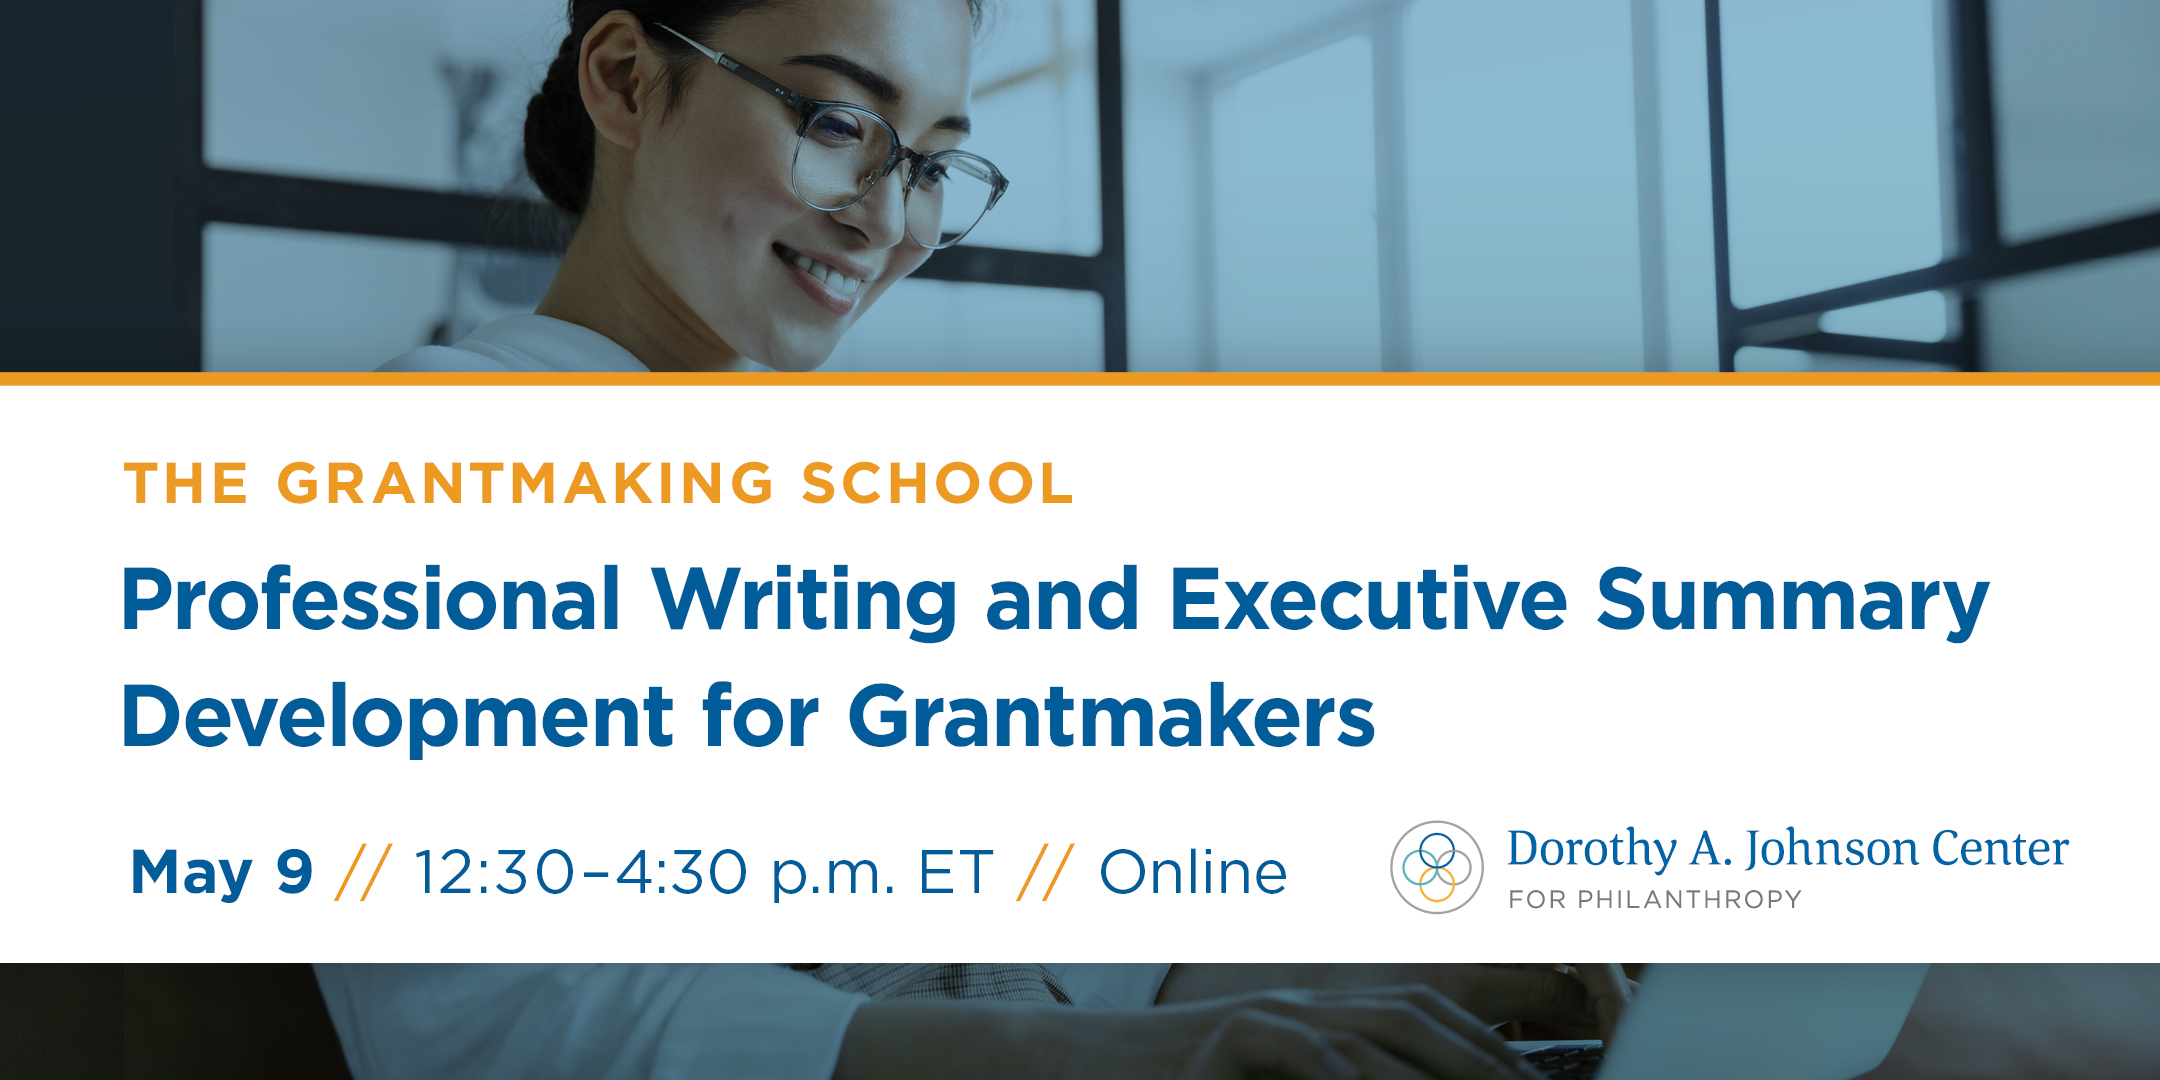 Professional Writing and Executive Summary Development for Grantmakers